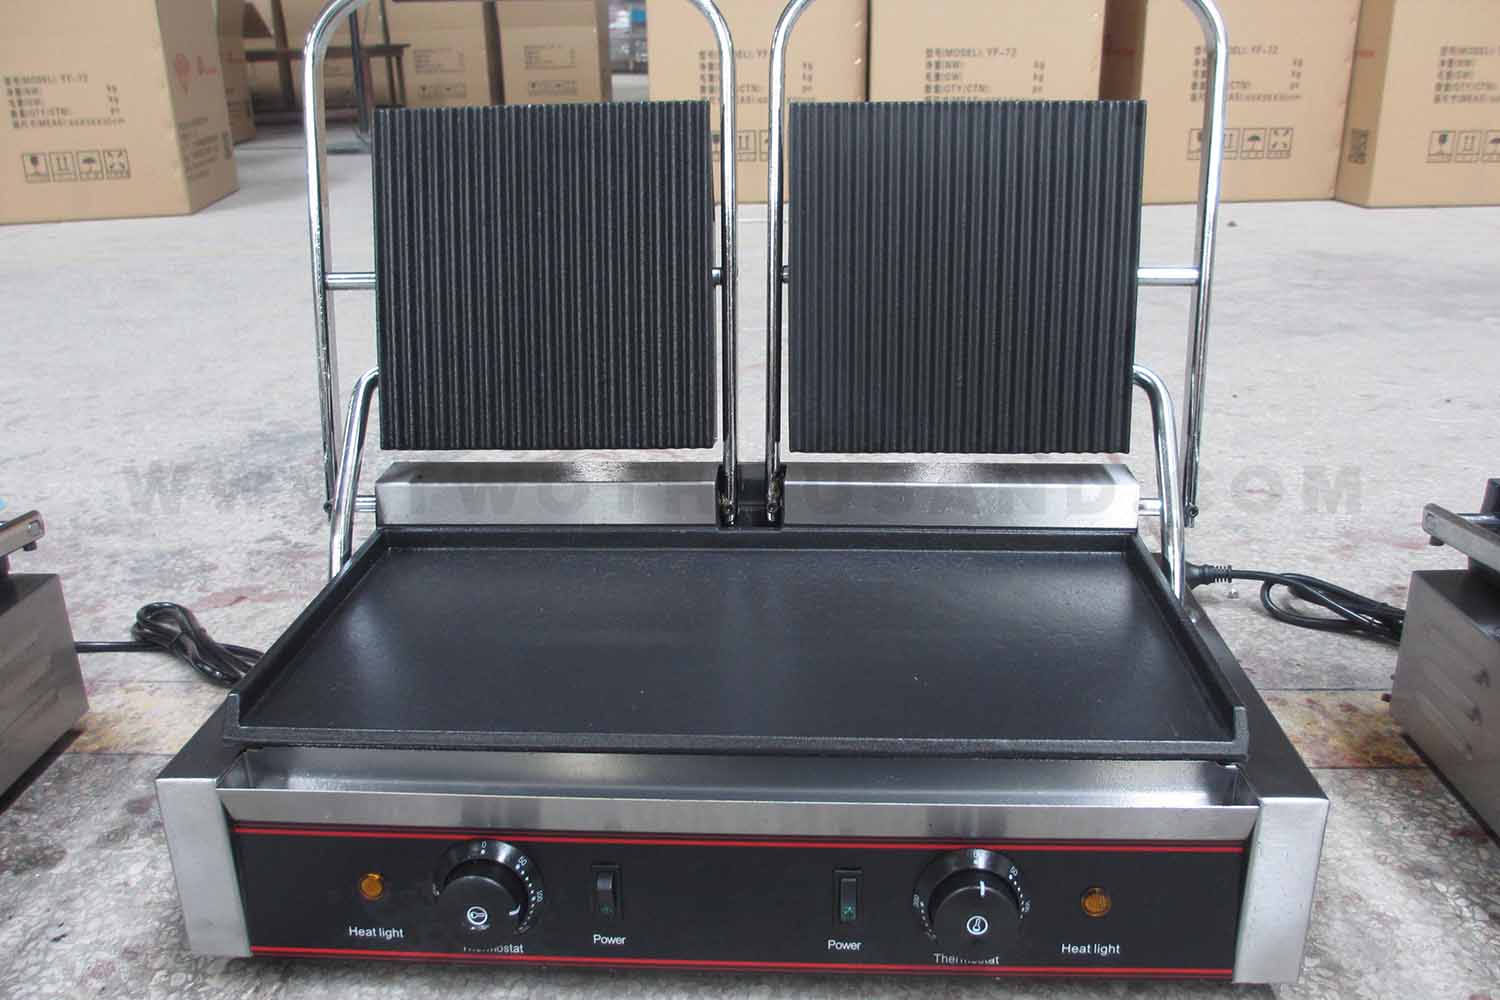 More View of Panini Griddle